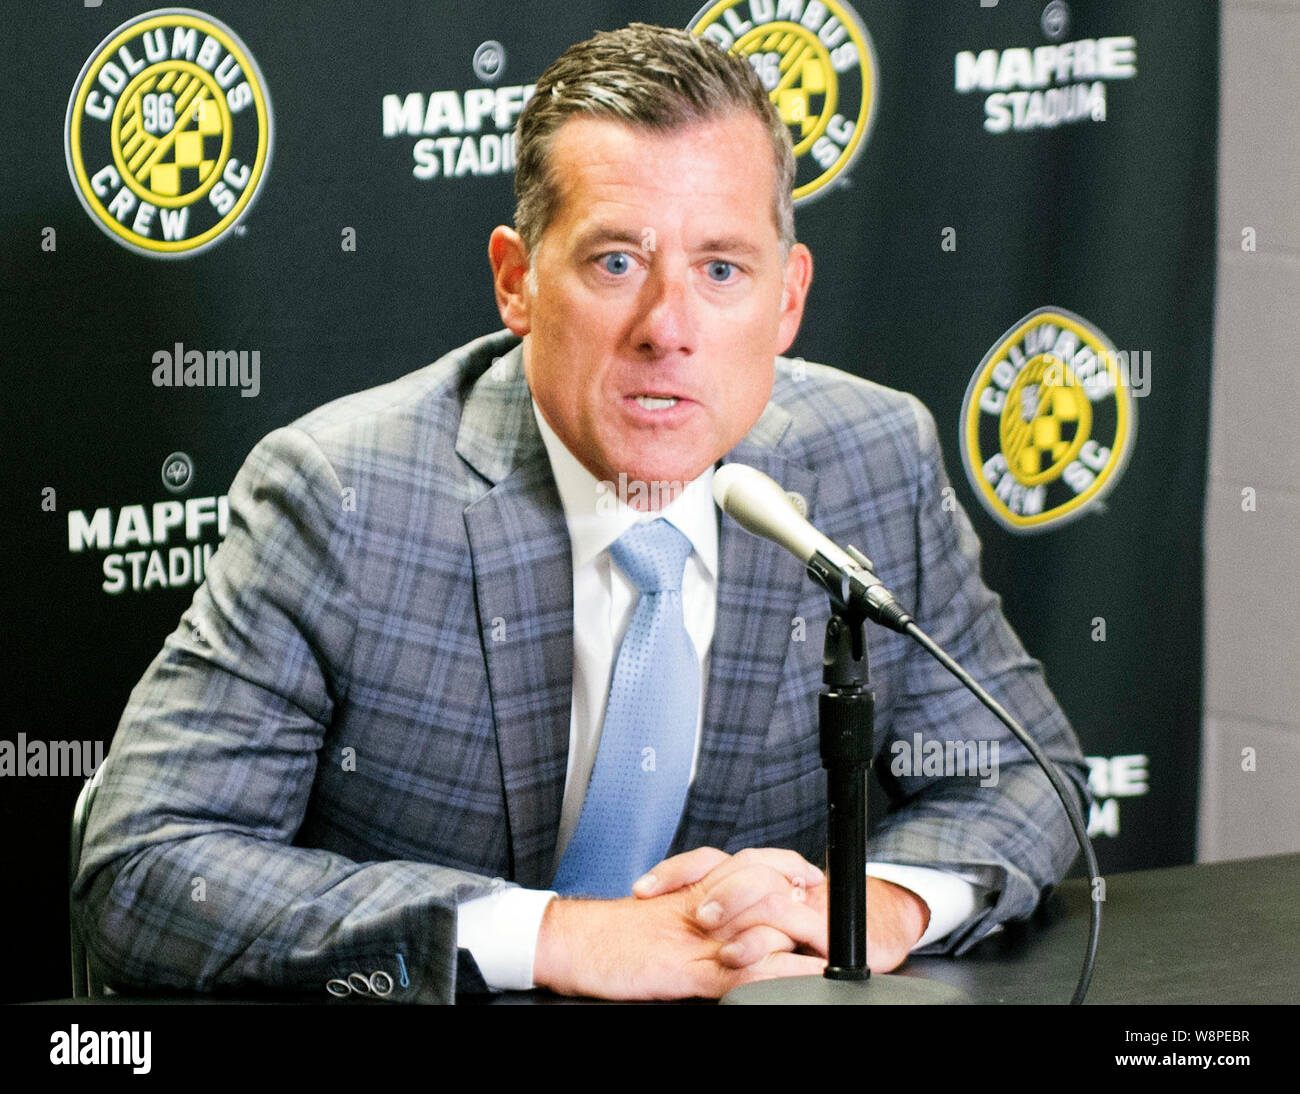 Columbus, Ohio, USA. 10th August, 2019. Newly appointed Columbus Crew SC Executive Vice President, Chief Business Officer, Steve Lyons addresses the media in the press conference in Columbus, Ohio, USA. Brent Clark/Alamy Live News Stock Photo